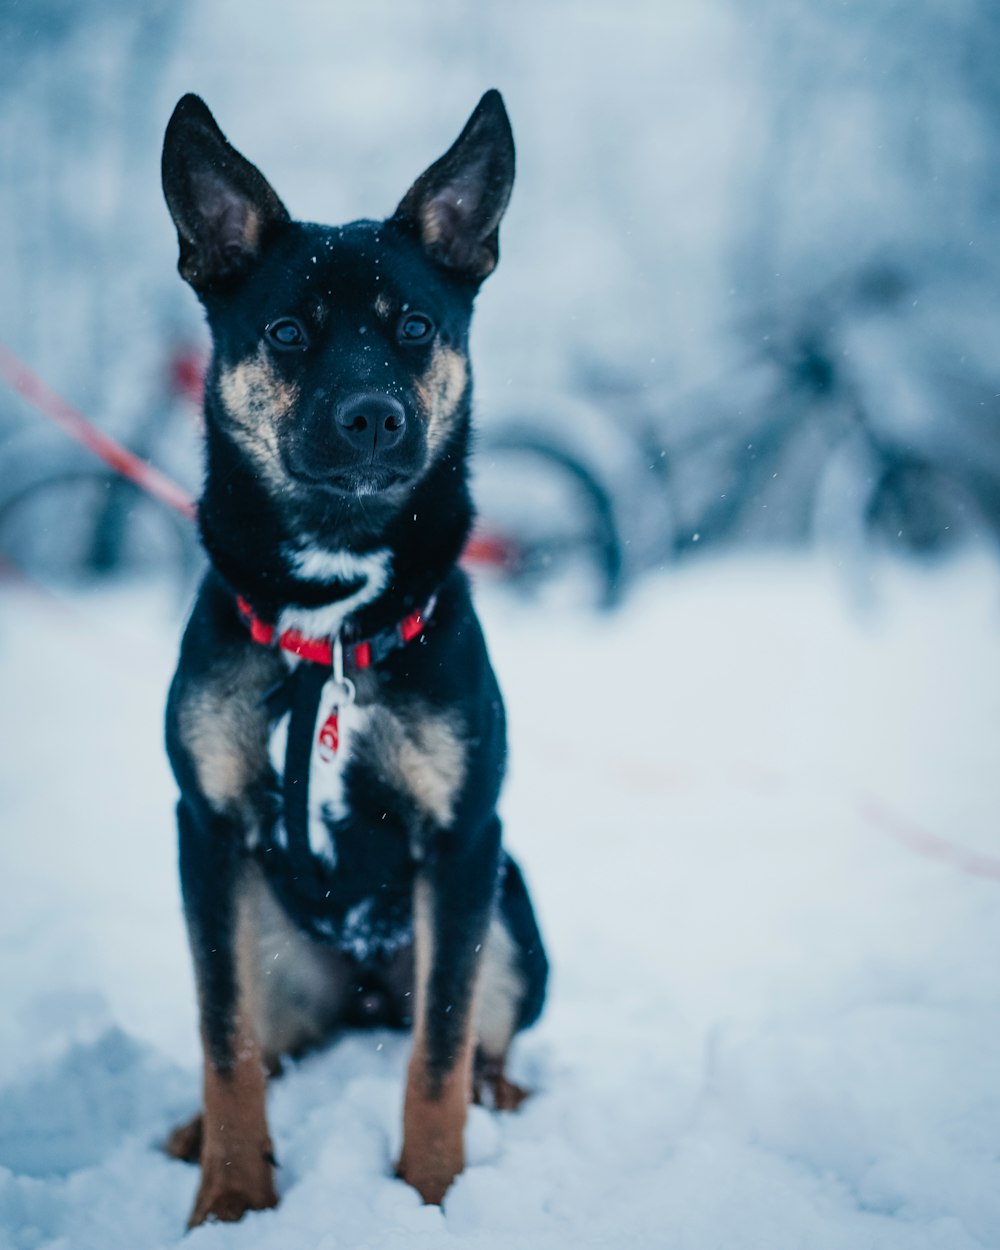 black and tan short coat dog on snow covered ground during daytime